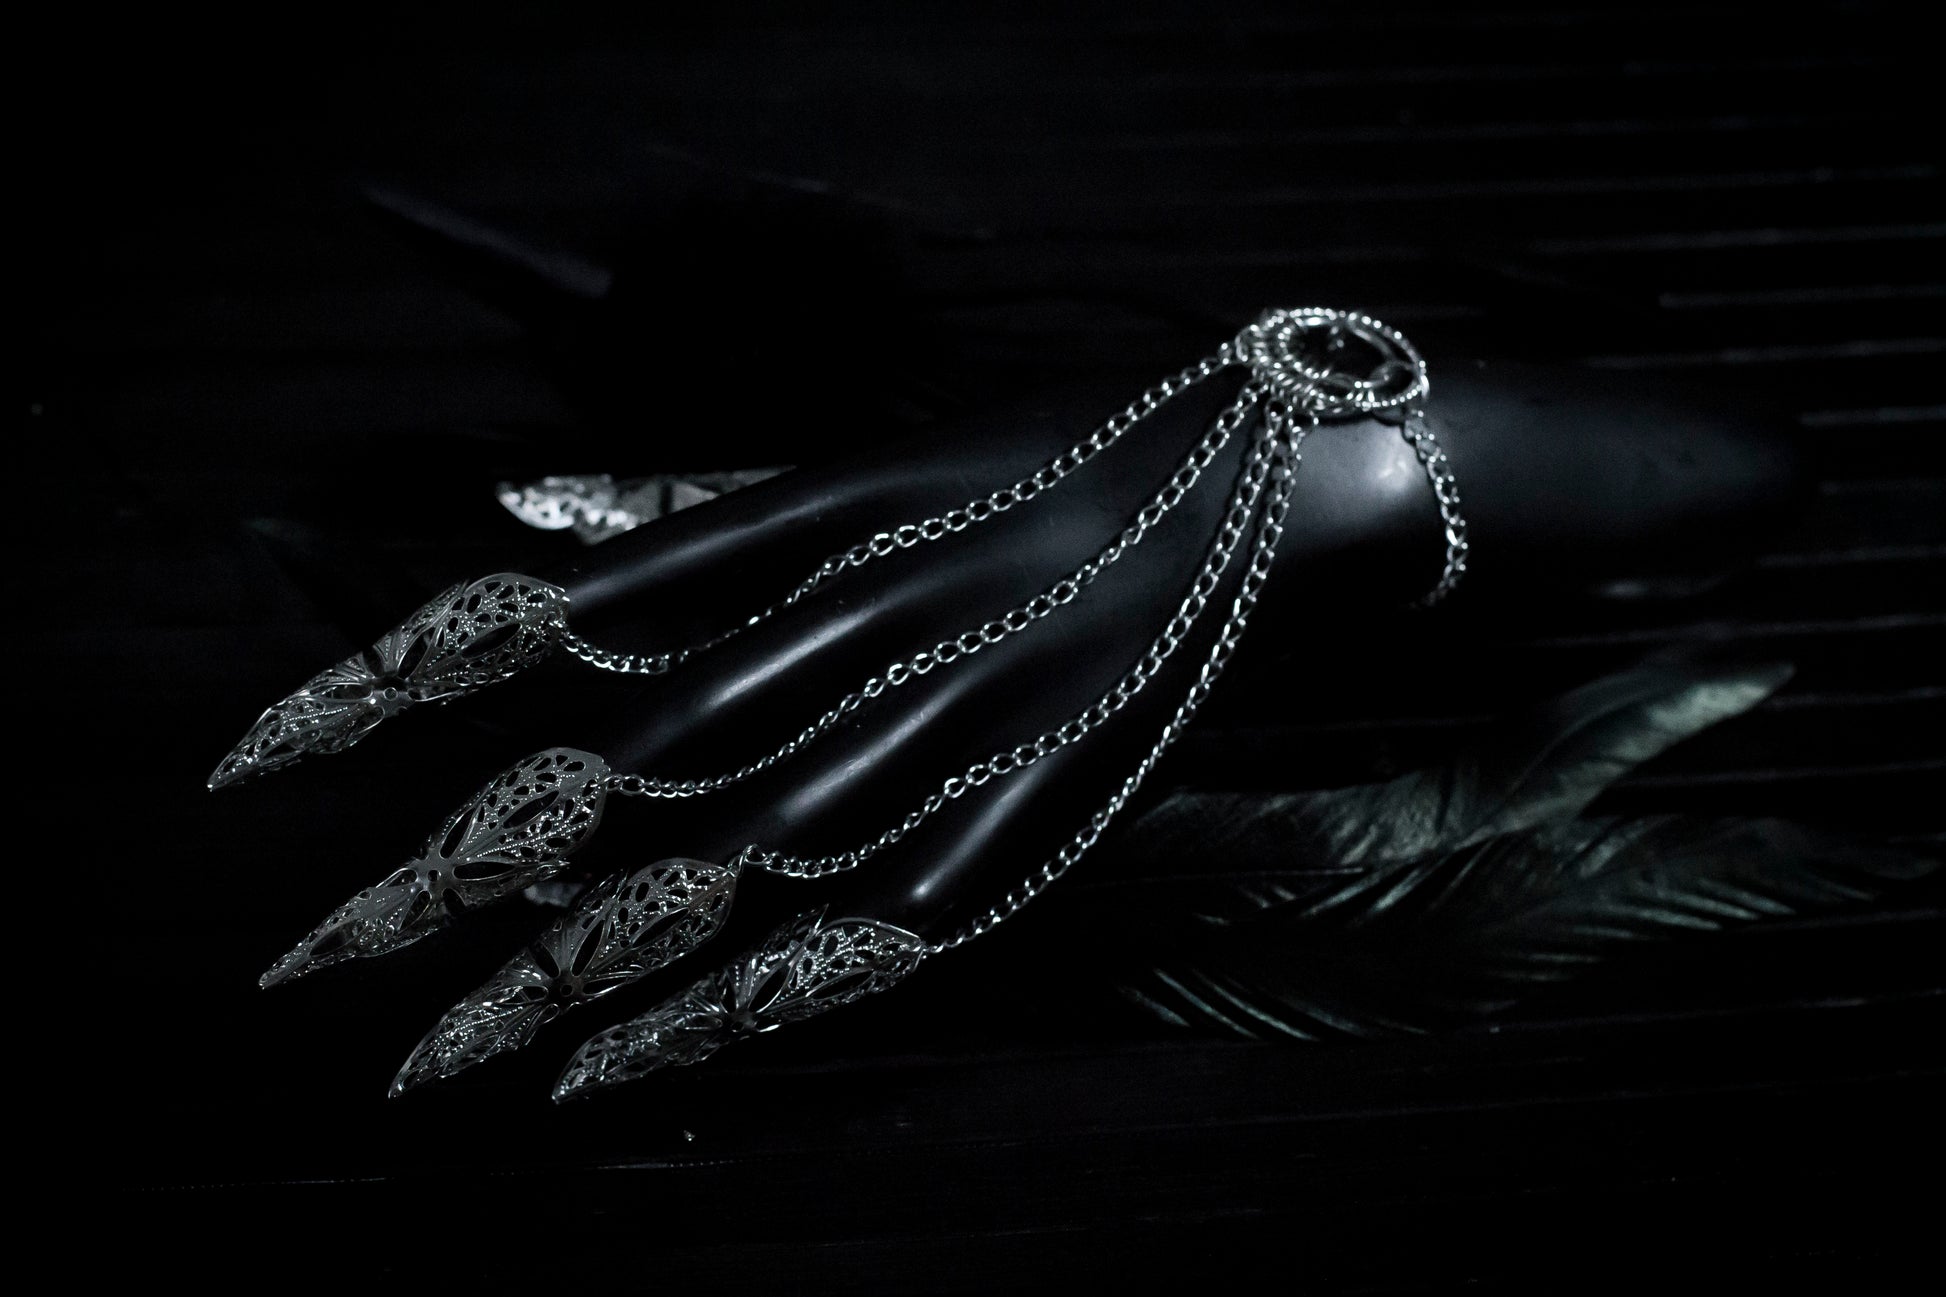 A close up shoot of a hand that extends dramatically with Myril Jewels' hand chain bracelet, each finger tipped with a delicate claw ring. The jewelry's silver filigree work captures the dark, neo-gothic aesthetic, perfect for adding a bold touch to Halloween looks or as a statement piece for those who favor gothic-chic or witchcore styles.